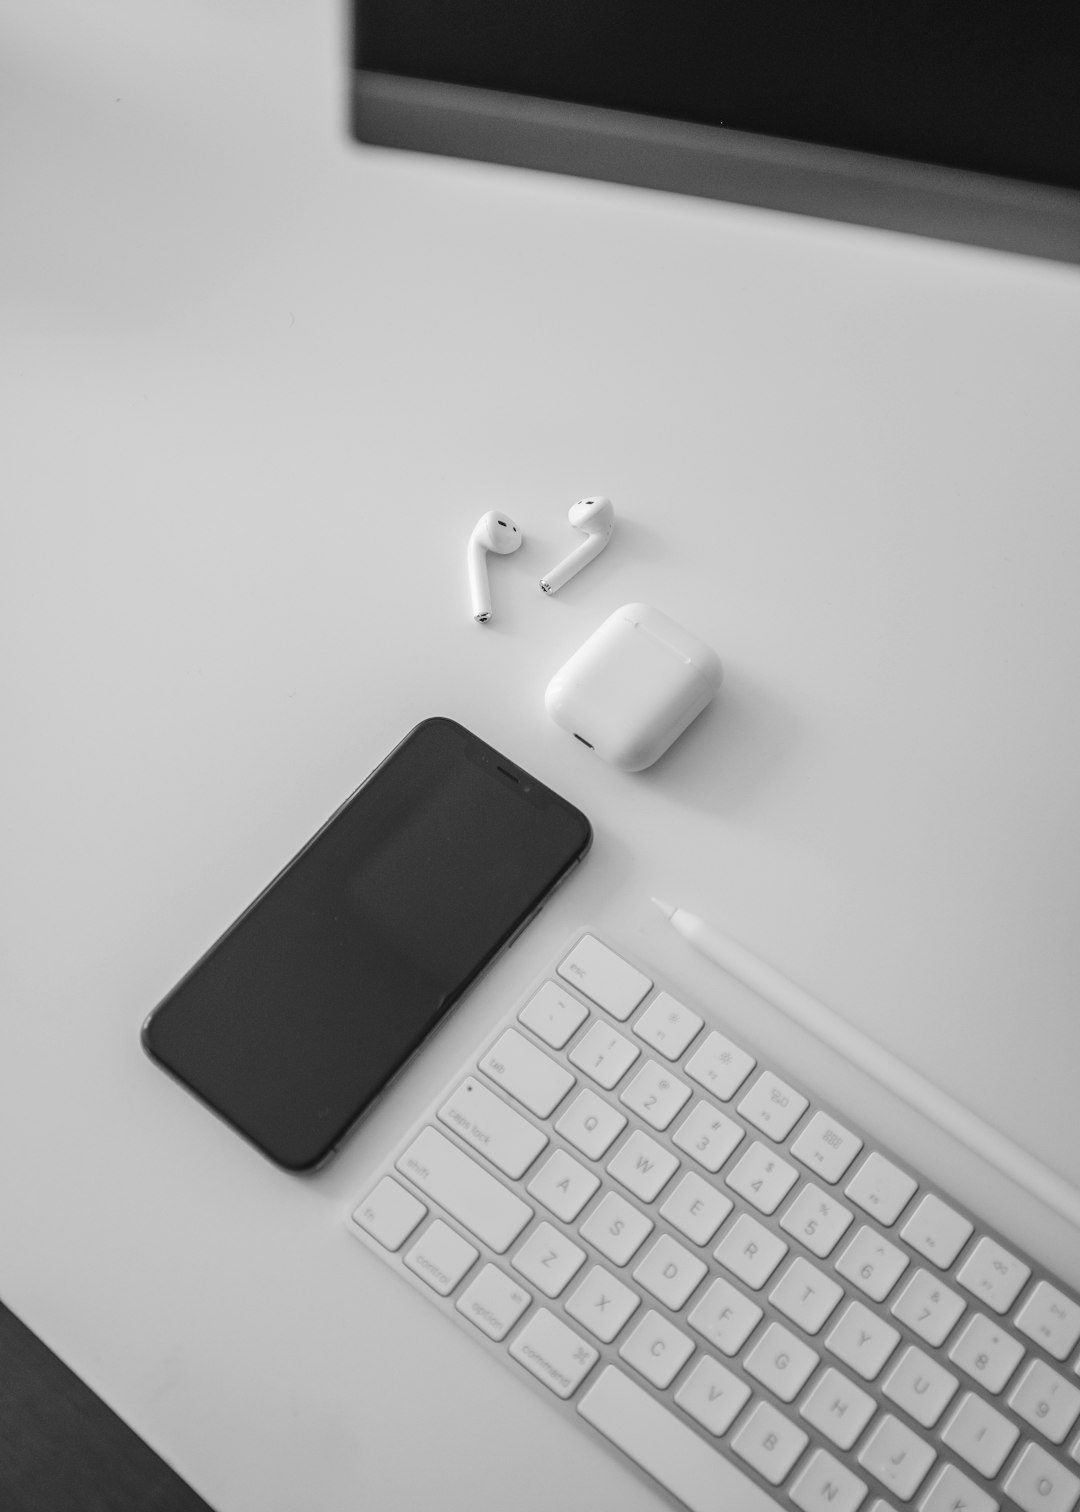 black iPhone X, Air pods, and Apple keyboard on desk